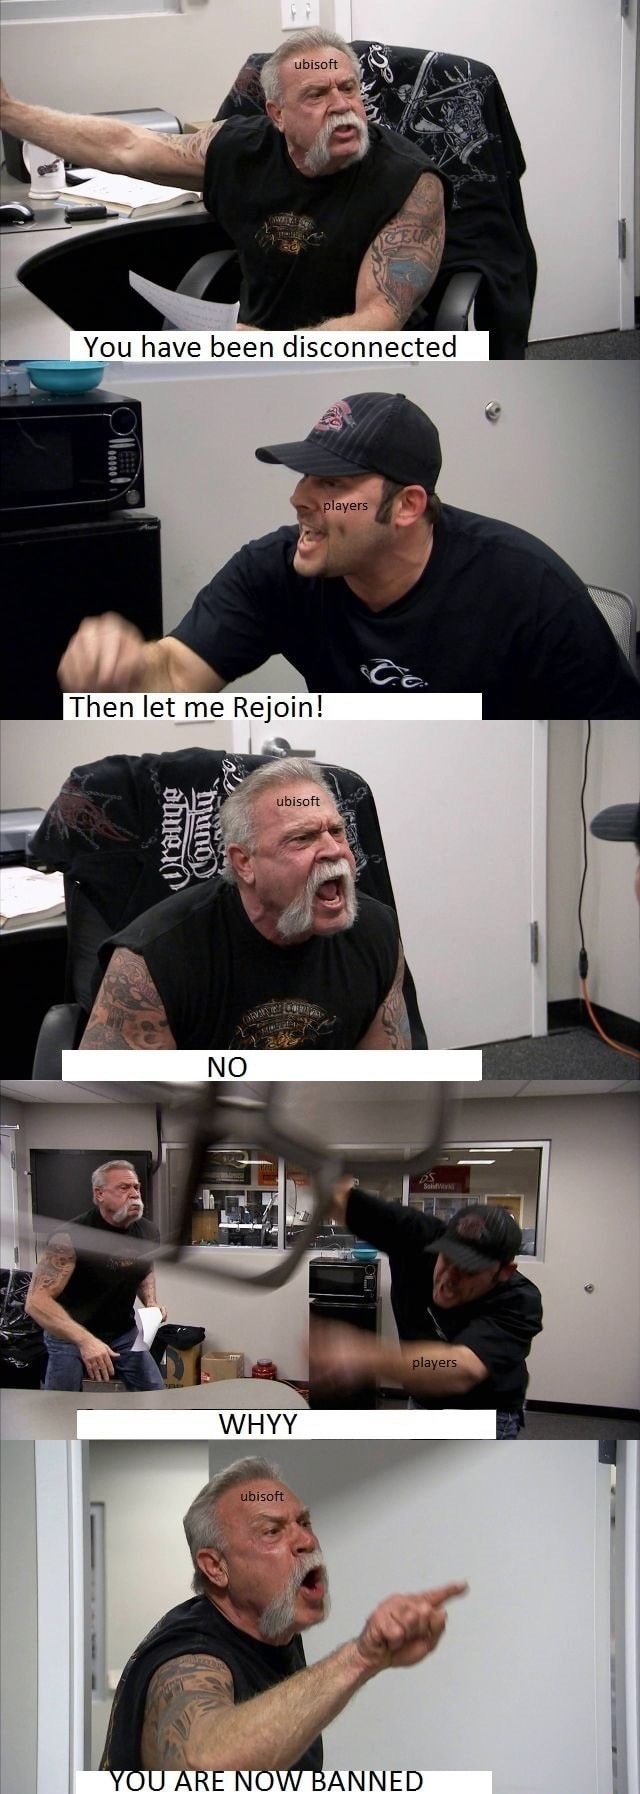 american chopper meme windows - ubisoft You have been disconnected players Then let me ubisoft dbugil muno No players Whyy ubisoft You Are Now Banned